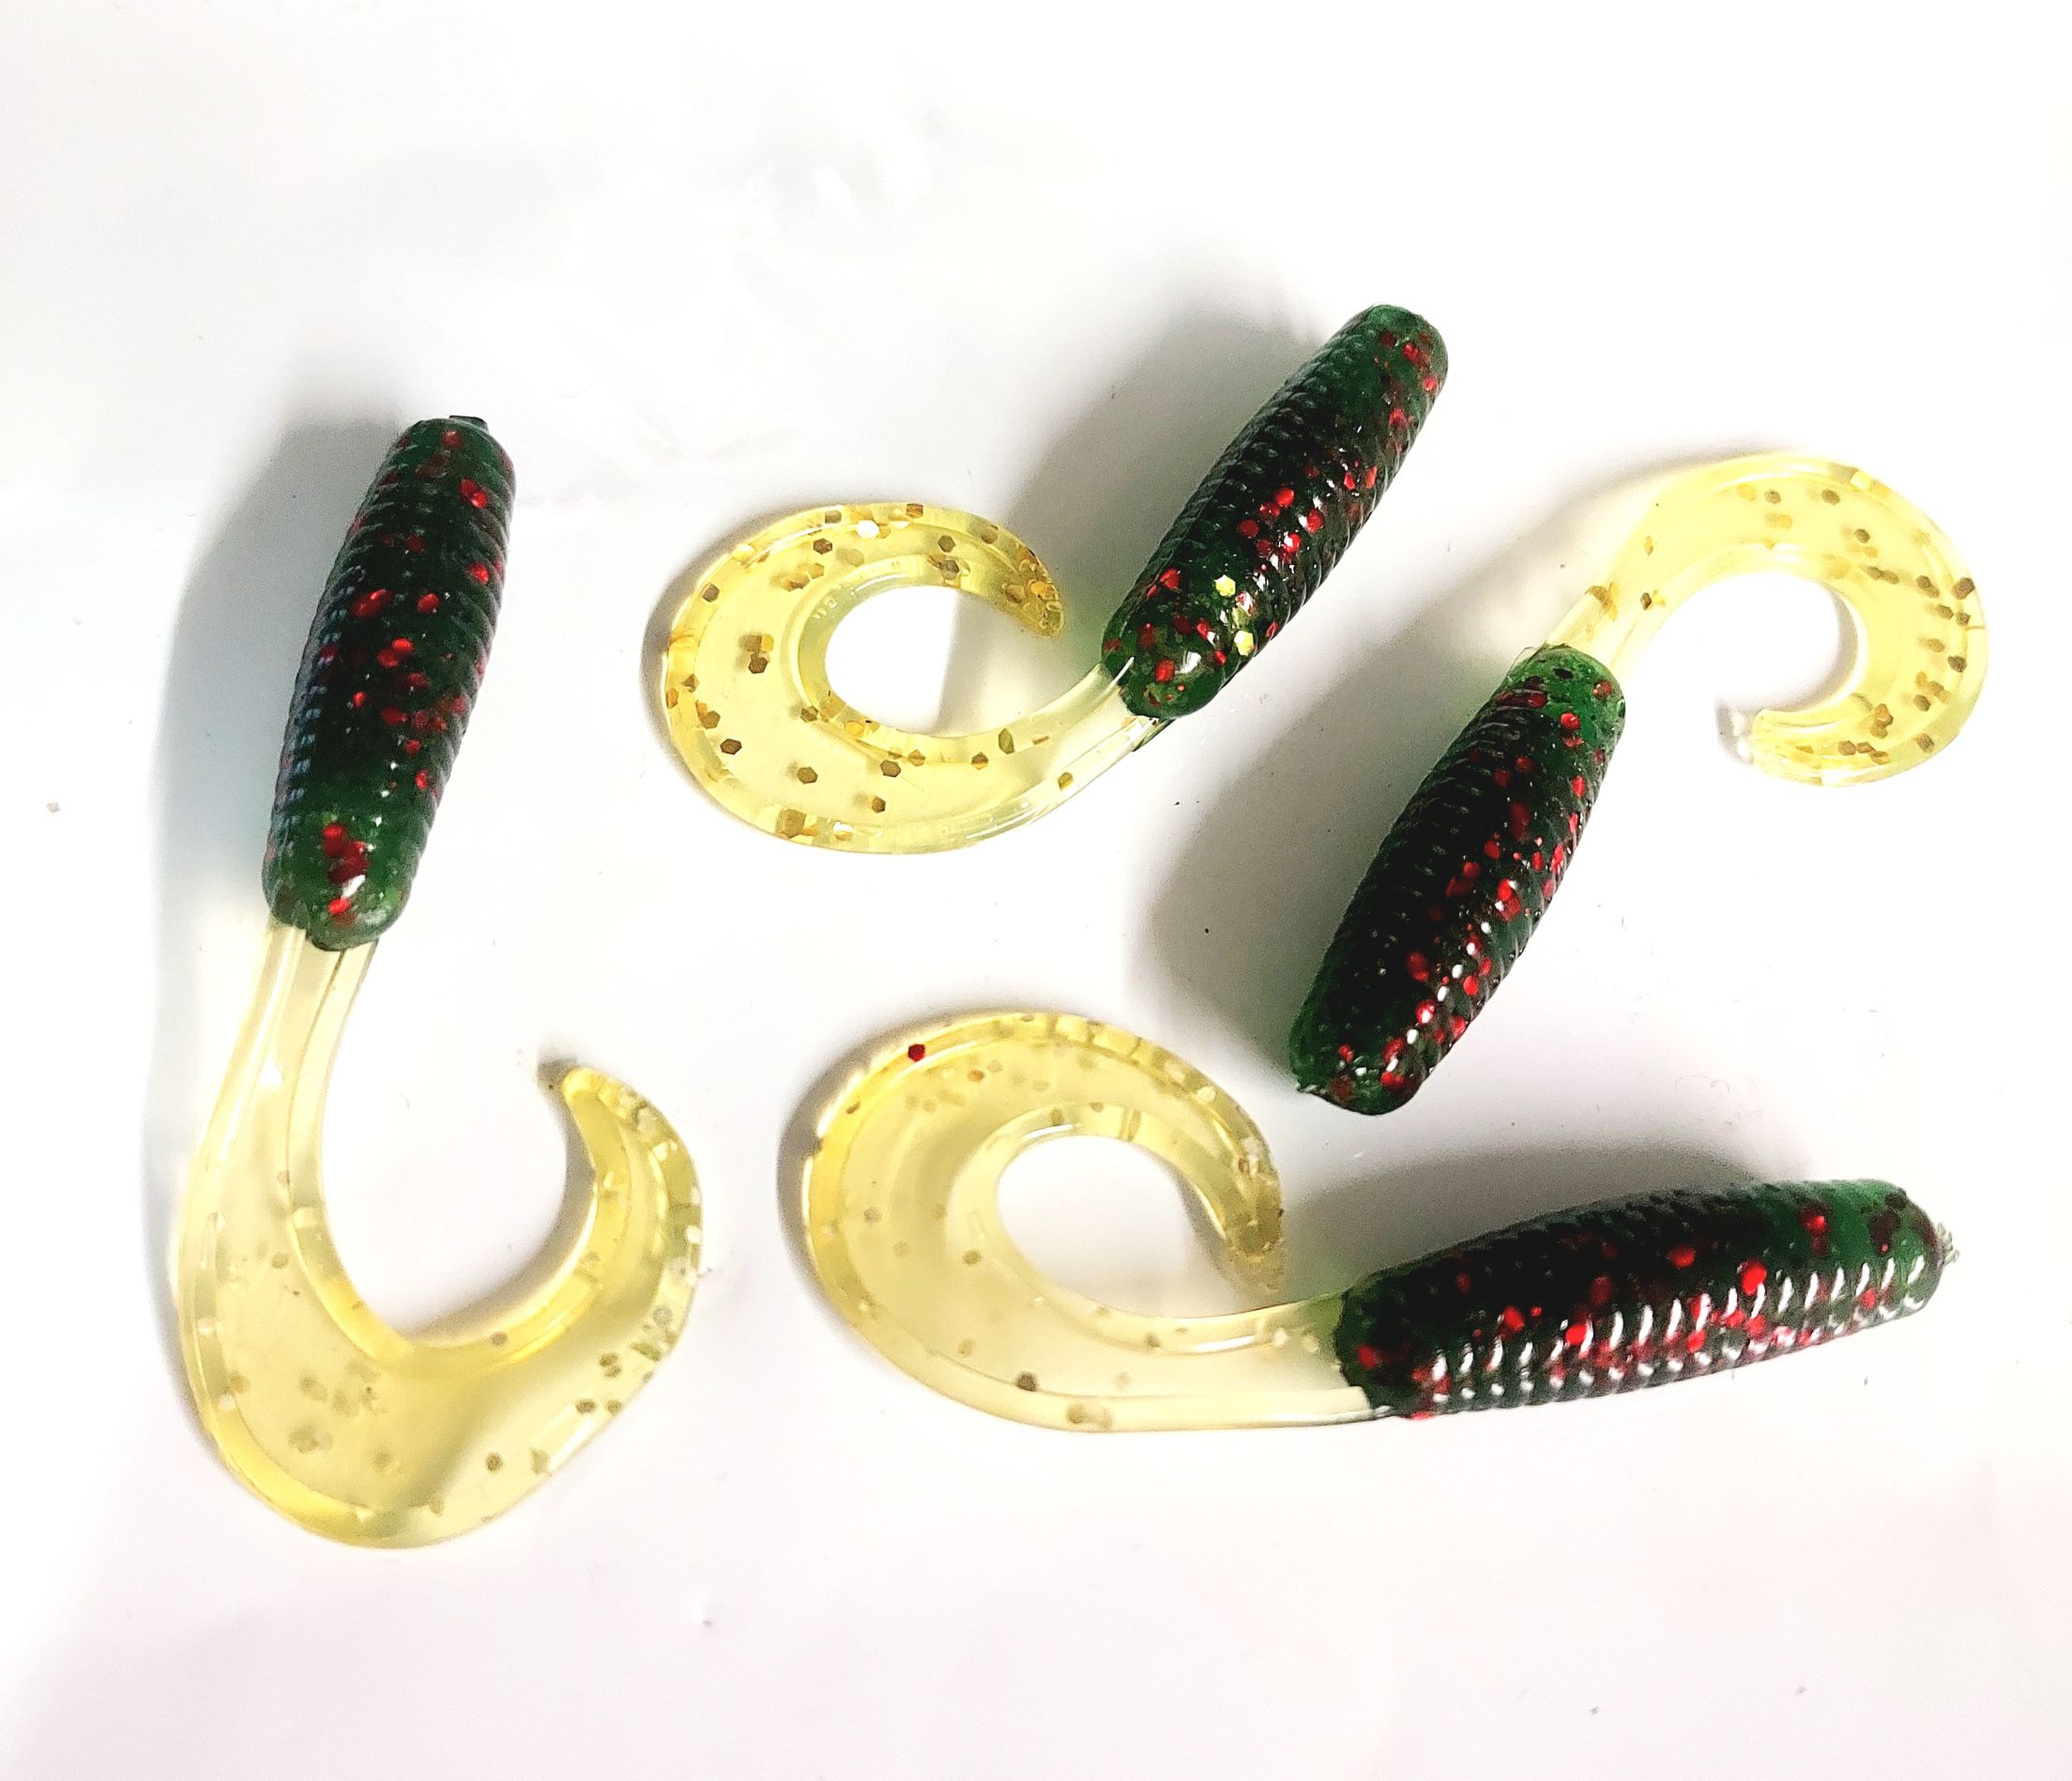 Crappie Grub soft plastics, 2 inch grub watermelon red with the Chartreuse  tail. We call this bait lucky charm - Get Hooked Magic Baits